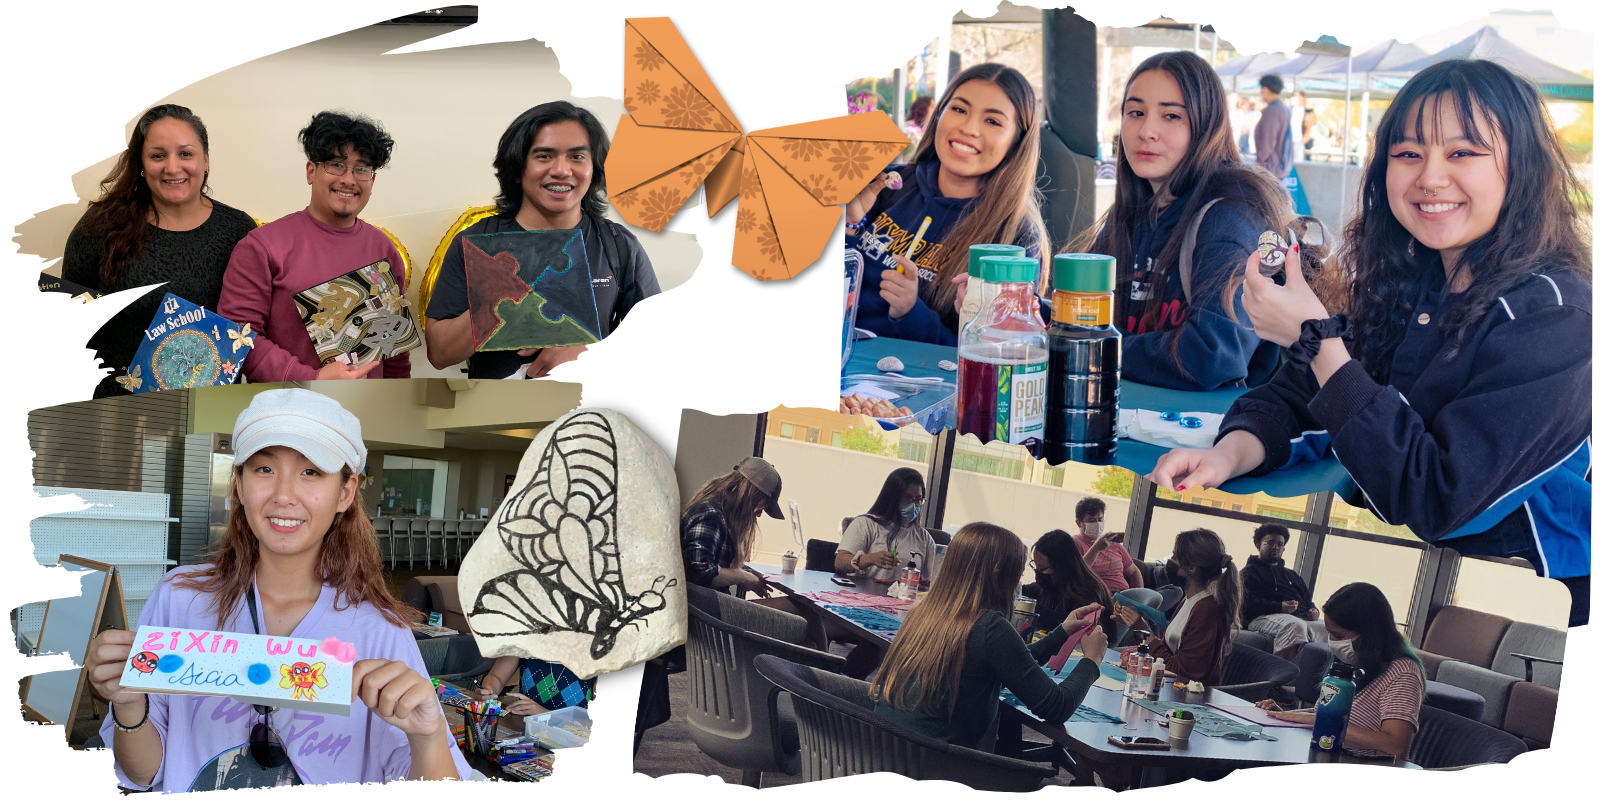 A collage of photos depicting diverse students smiling and showing off their arts and crafts creations.